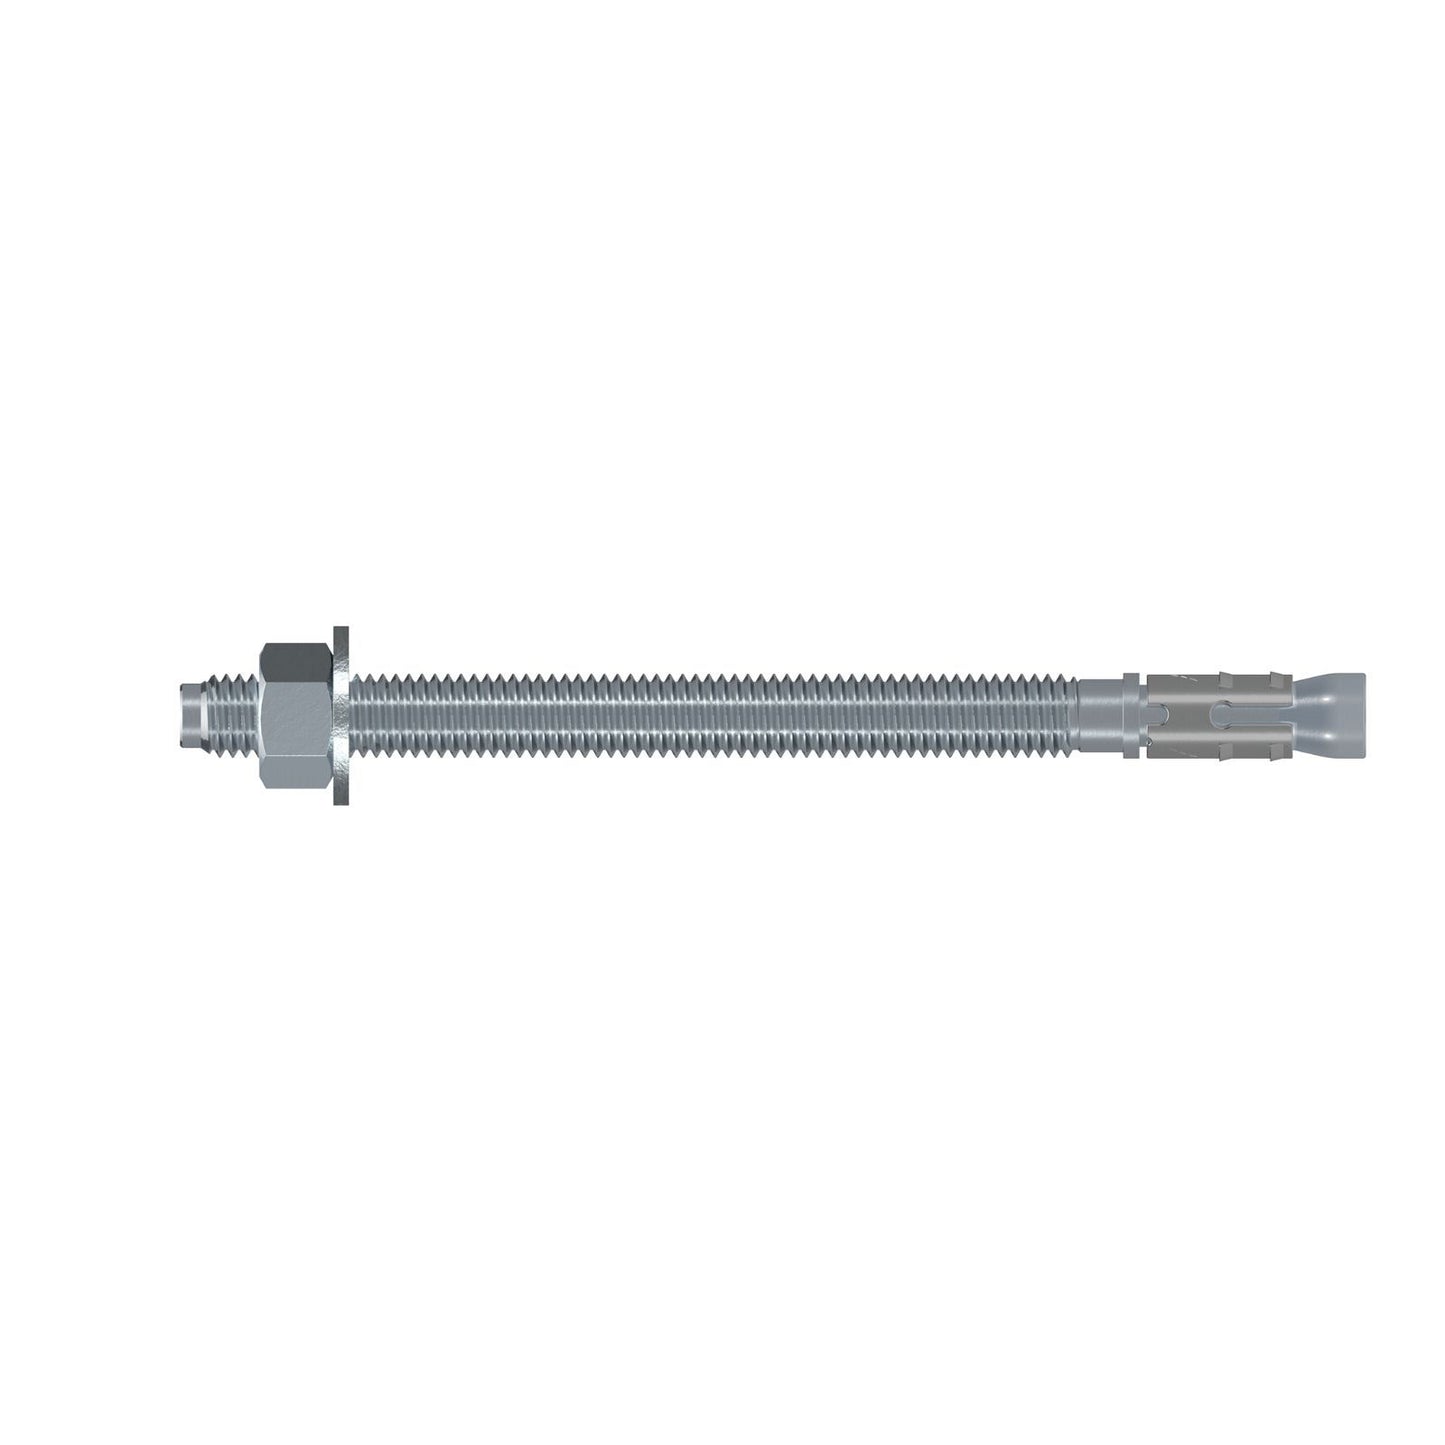 5/8" x 10" Simpson Strong Bolt 2 Wedge Anchor, Stainless Steel